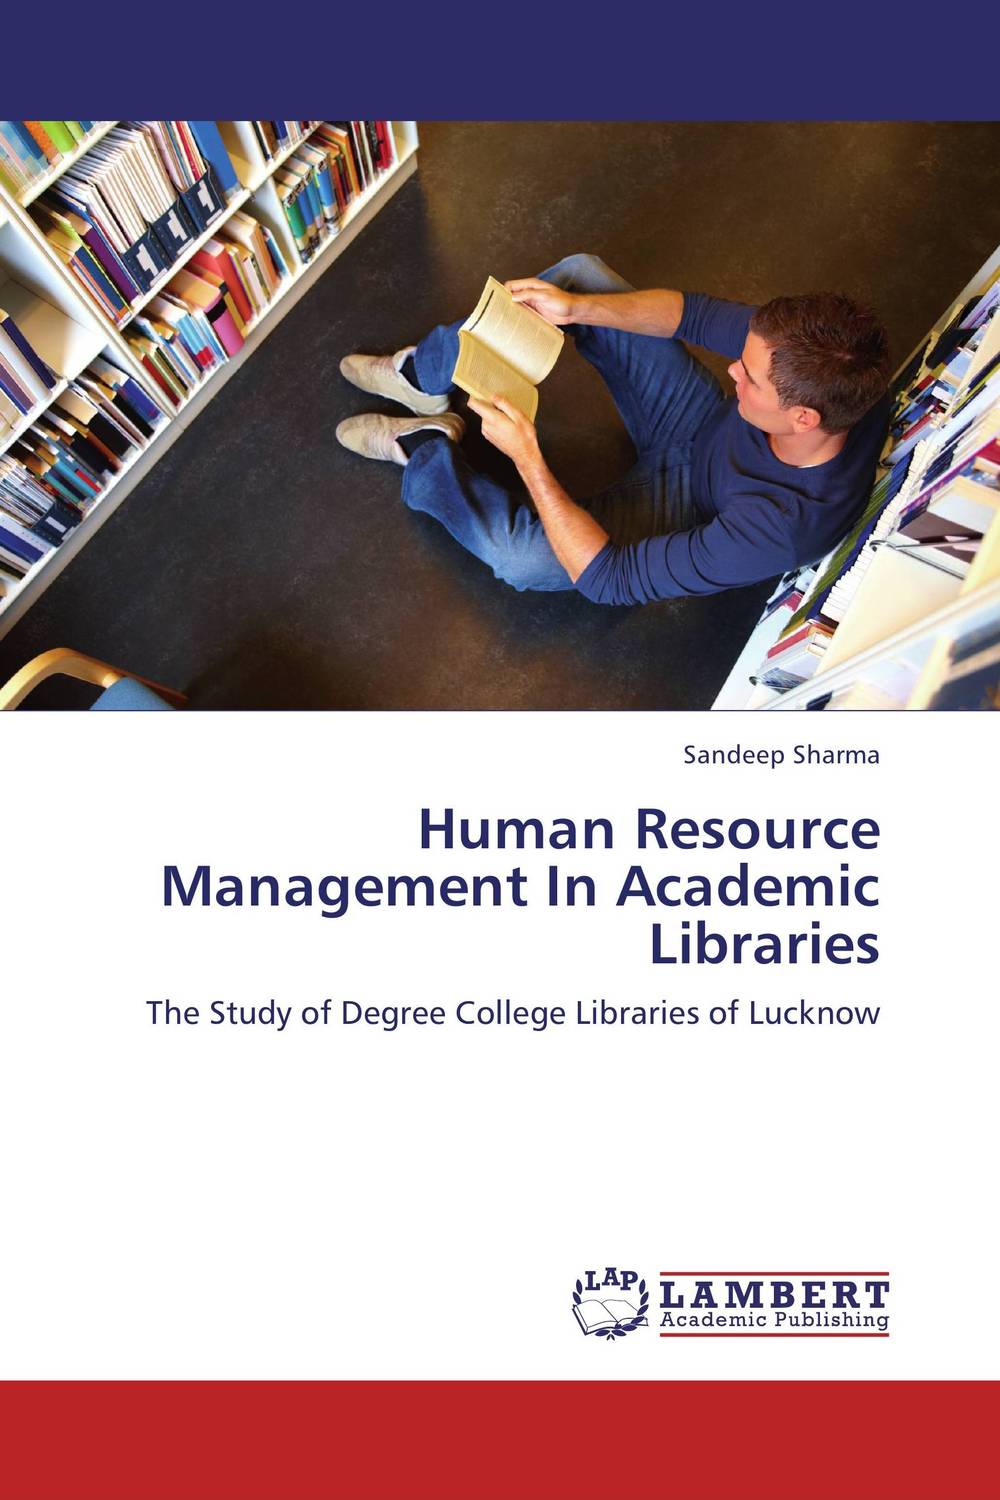 Human Resource Management In Academic Libraries